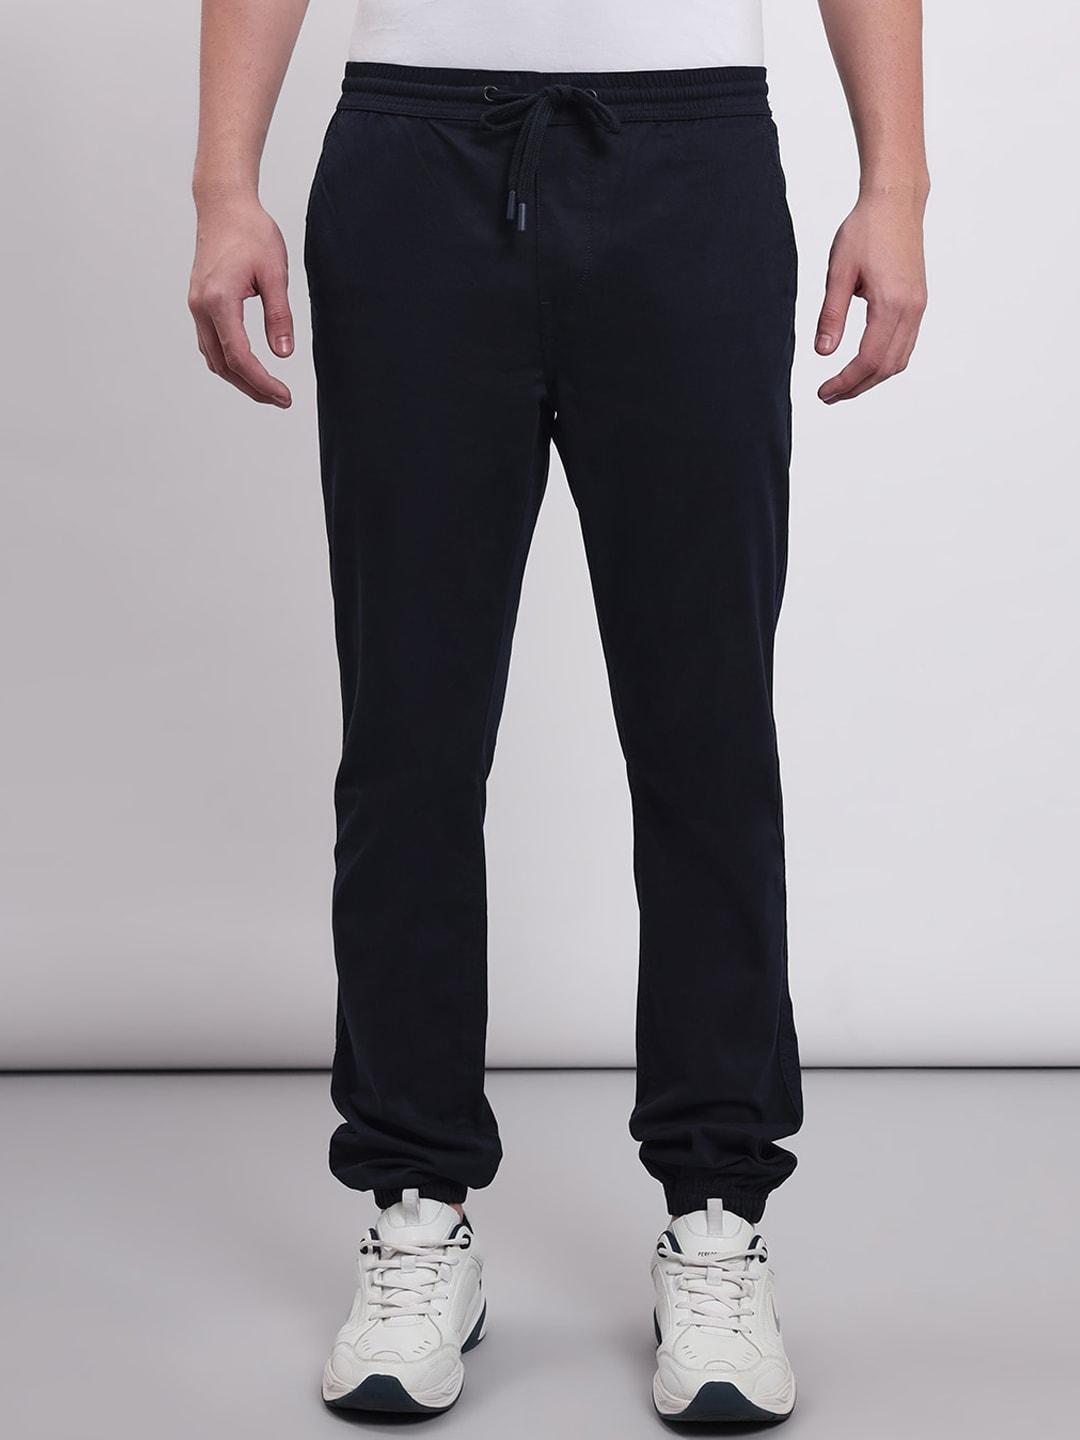 lee-men-relaxed-fit-high-rise-joggers